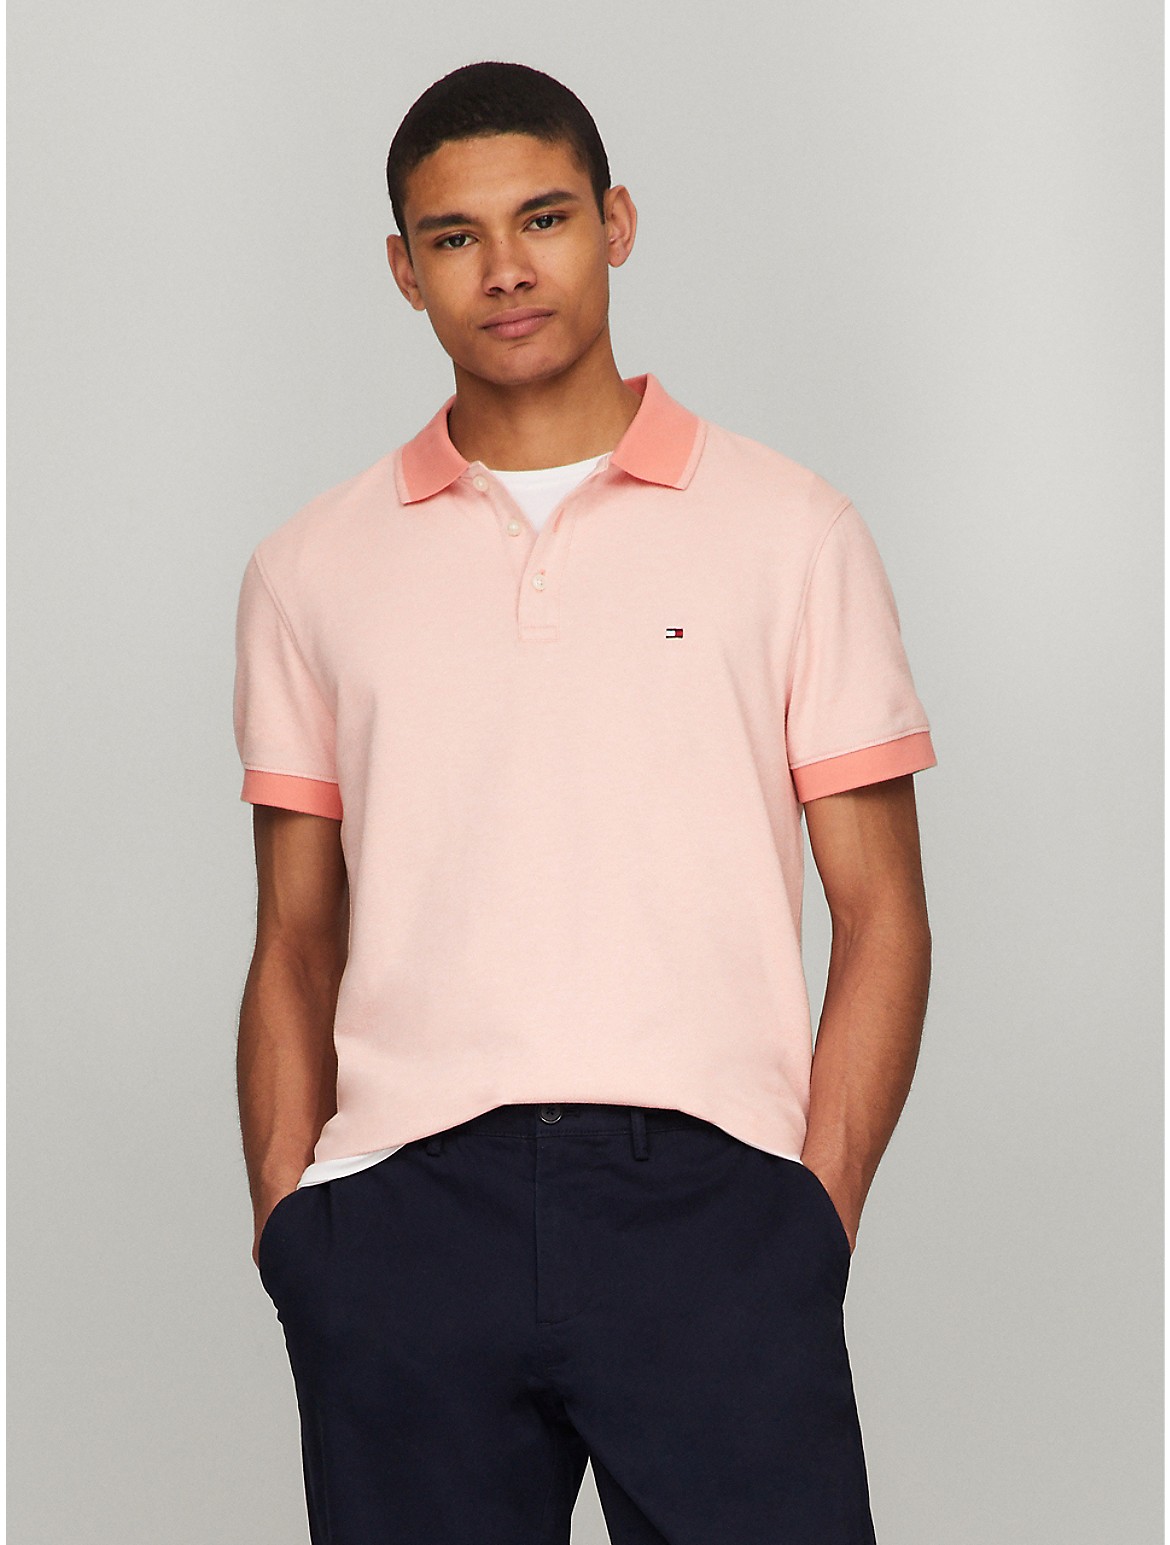 Tommy Hilfiger Men's Slim Fit Tipped Polo